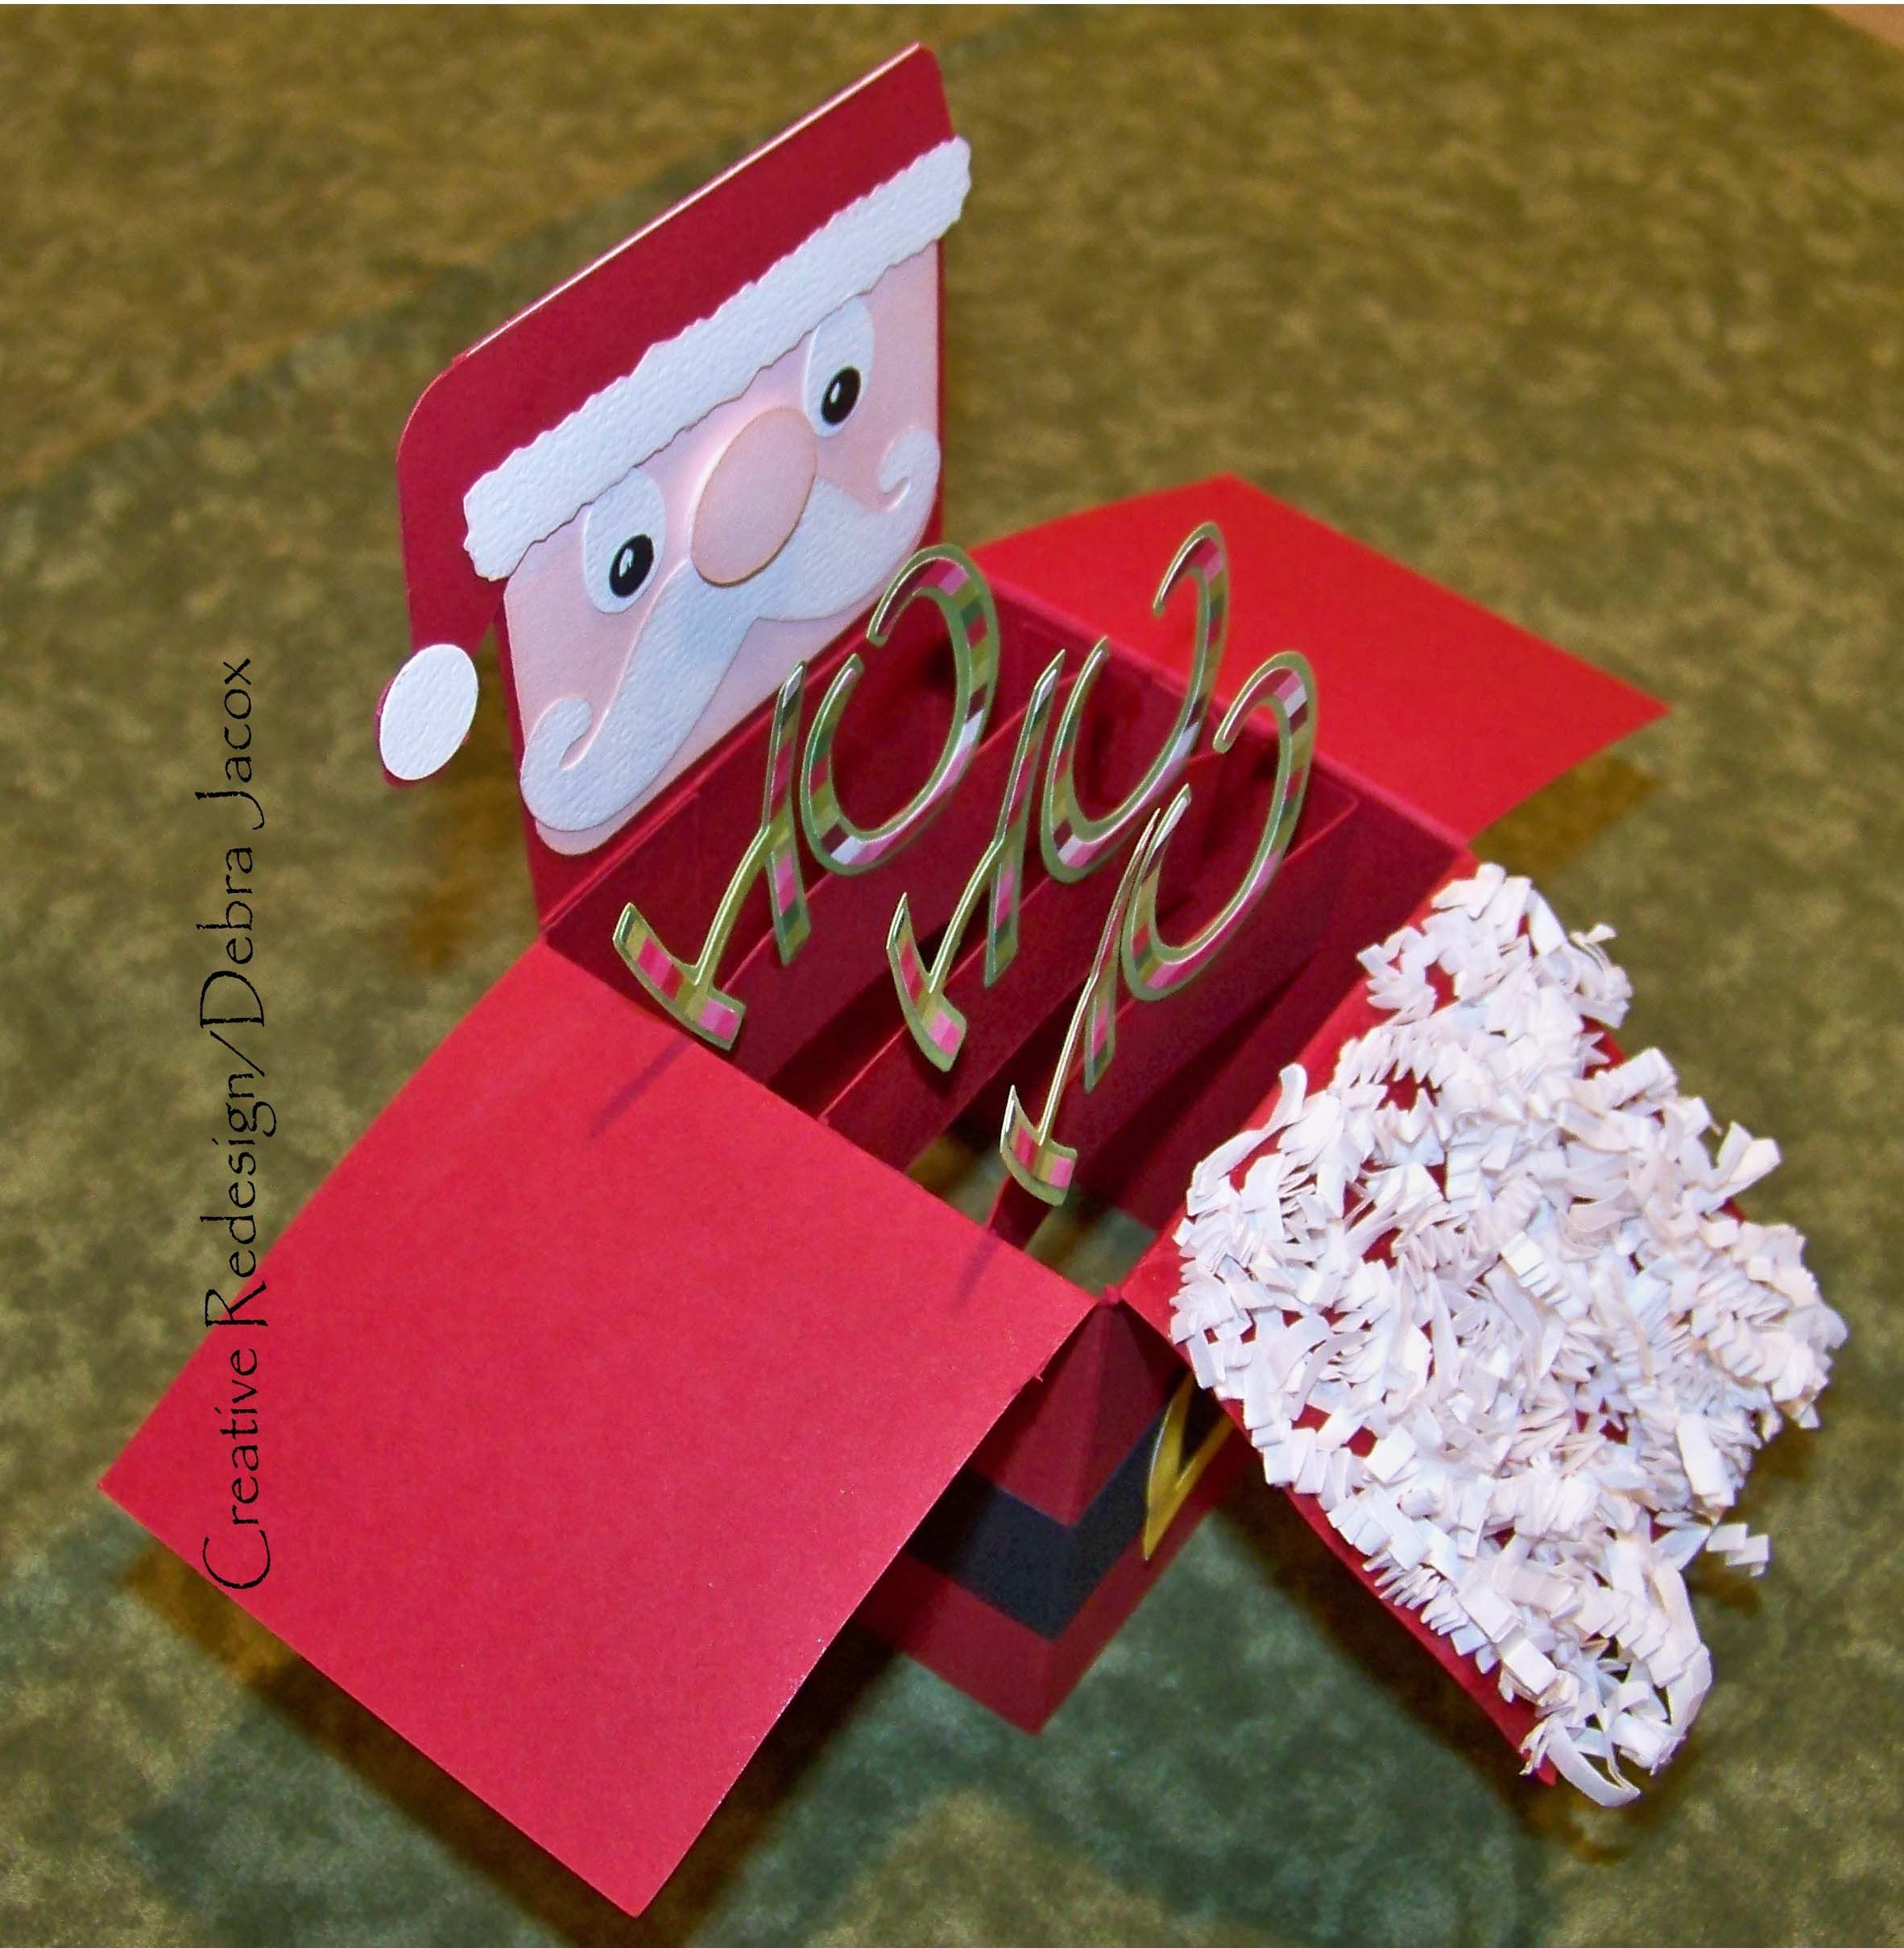 Santa Papercraft Folding Box Santa Card the Beard is Crimped Paper for Adding to